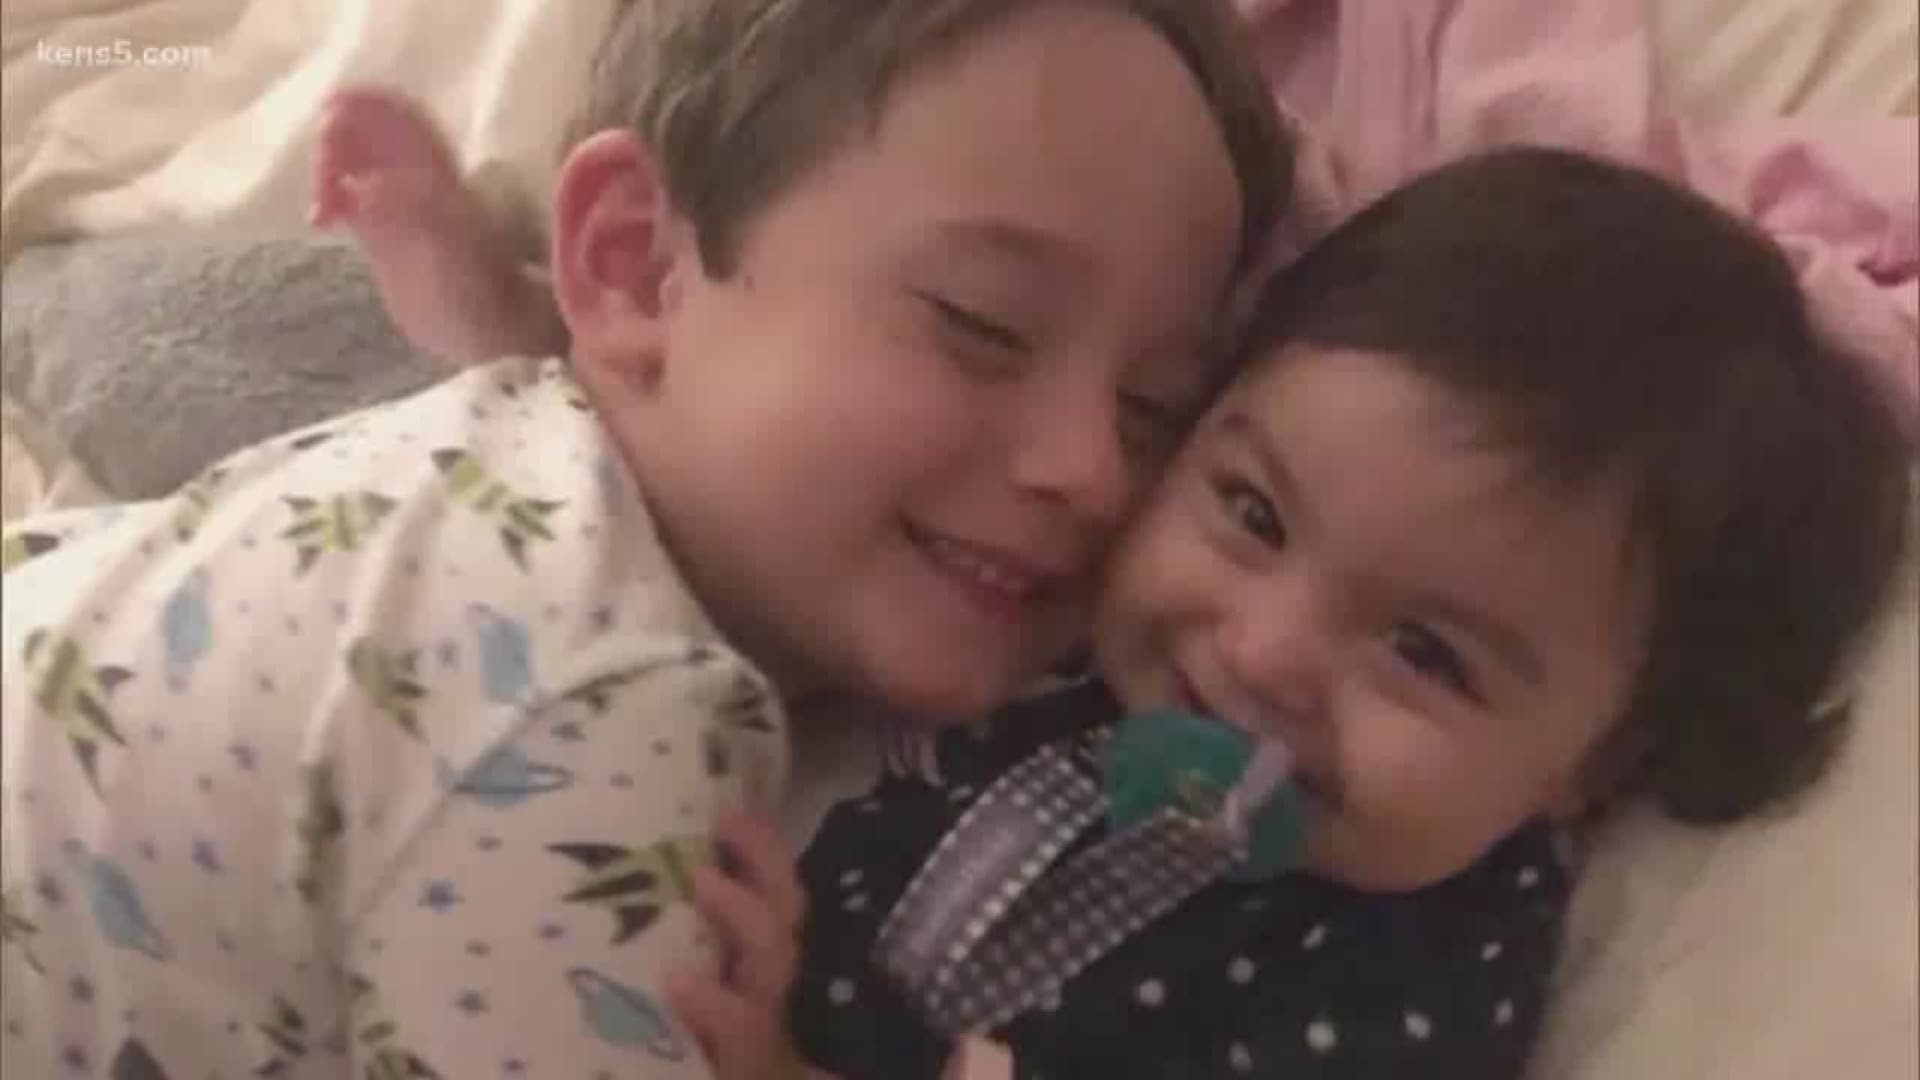 This San Antonio family lost their daughter to brain cancer at a young age. Not wanting their son to be without siblings, they adopted Bridgette.